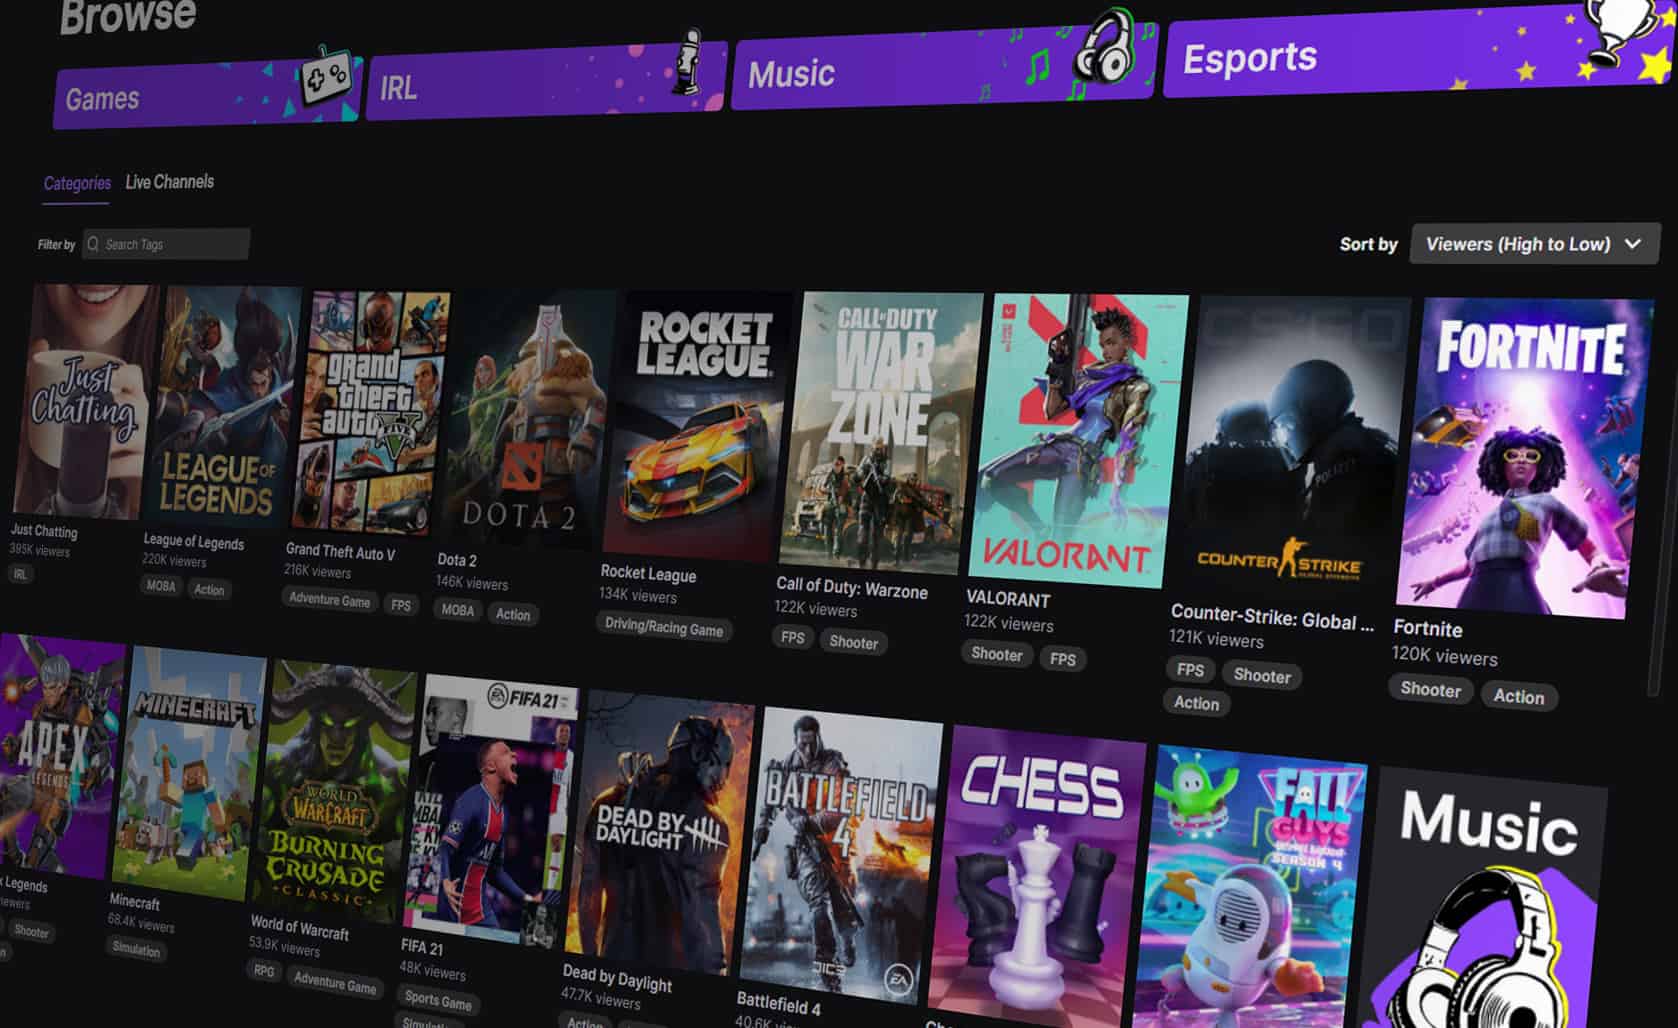 Twitch categories browsing sorted from high to low